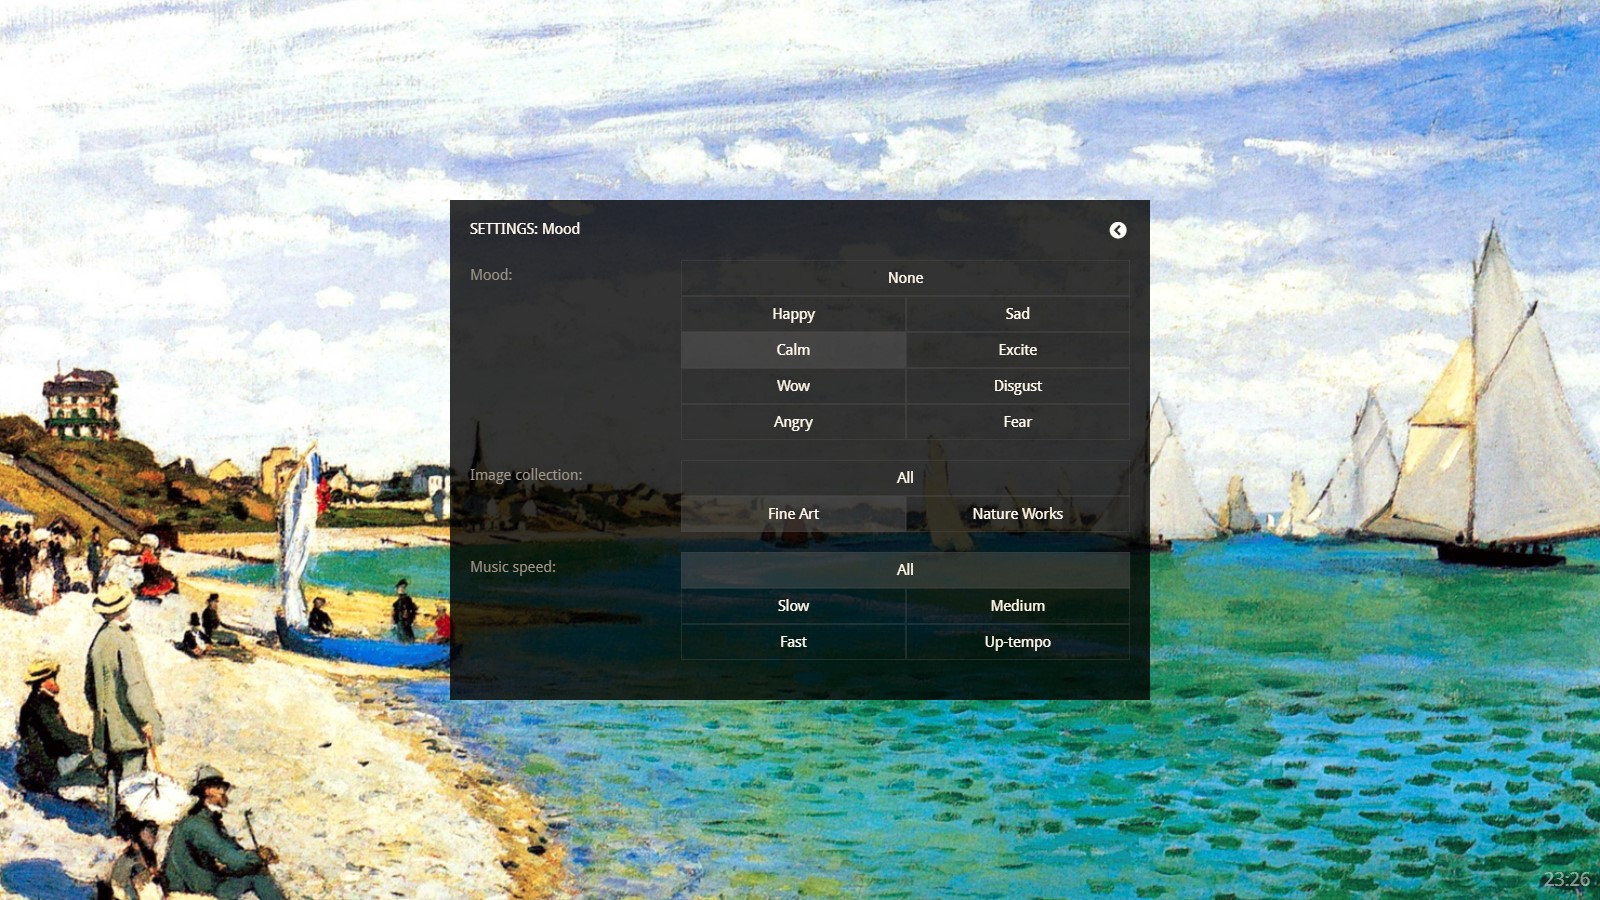 ArtPlayer screenshot displaying mood settings and calming artworks using image recognition technology